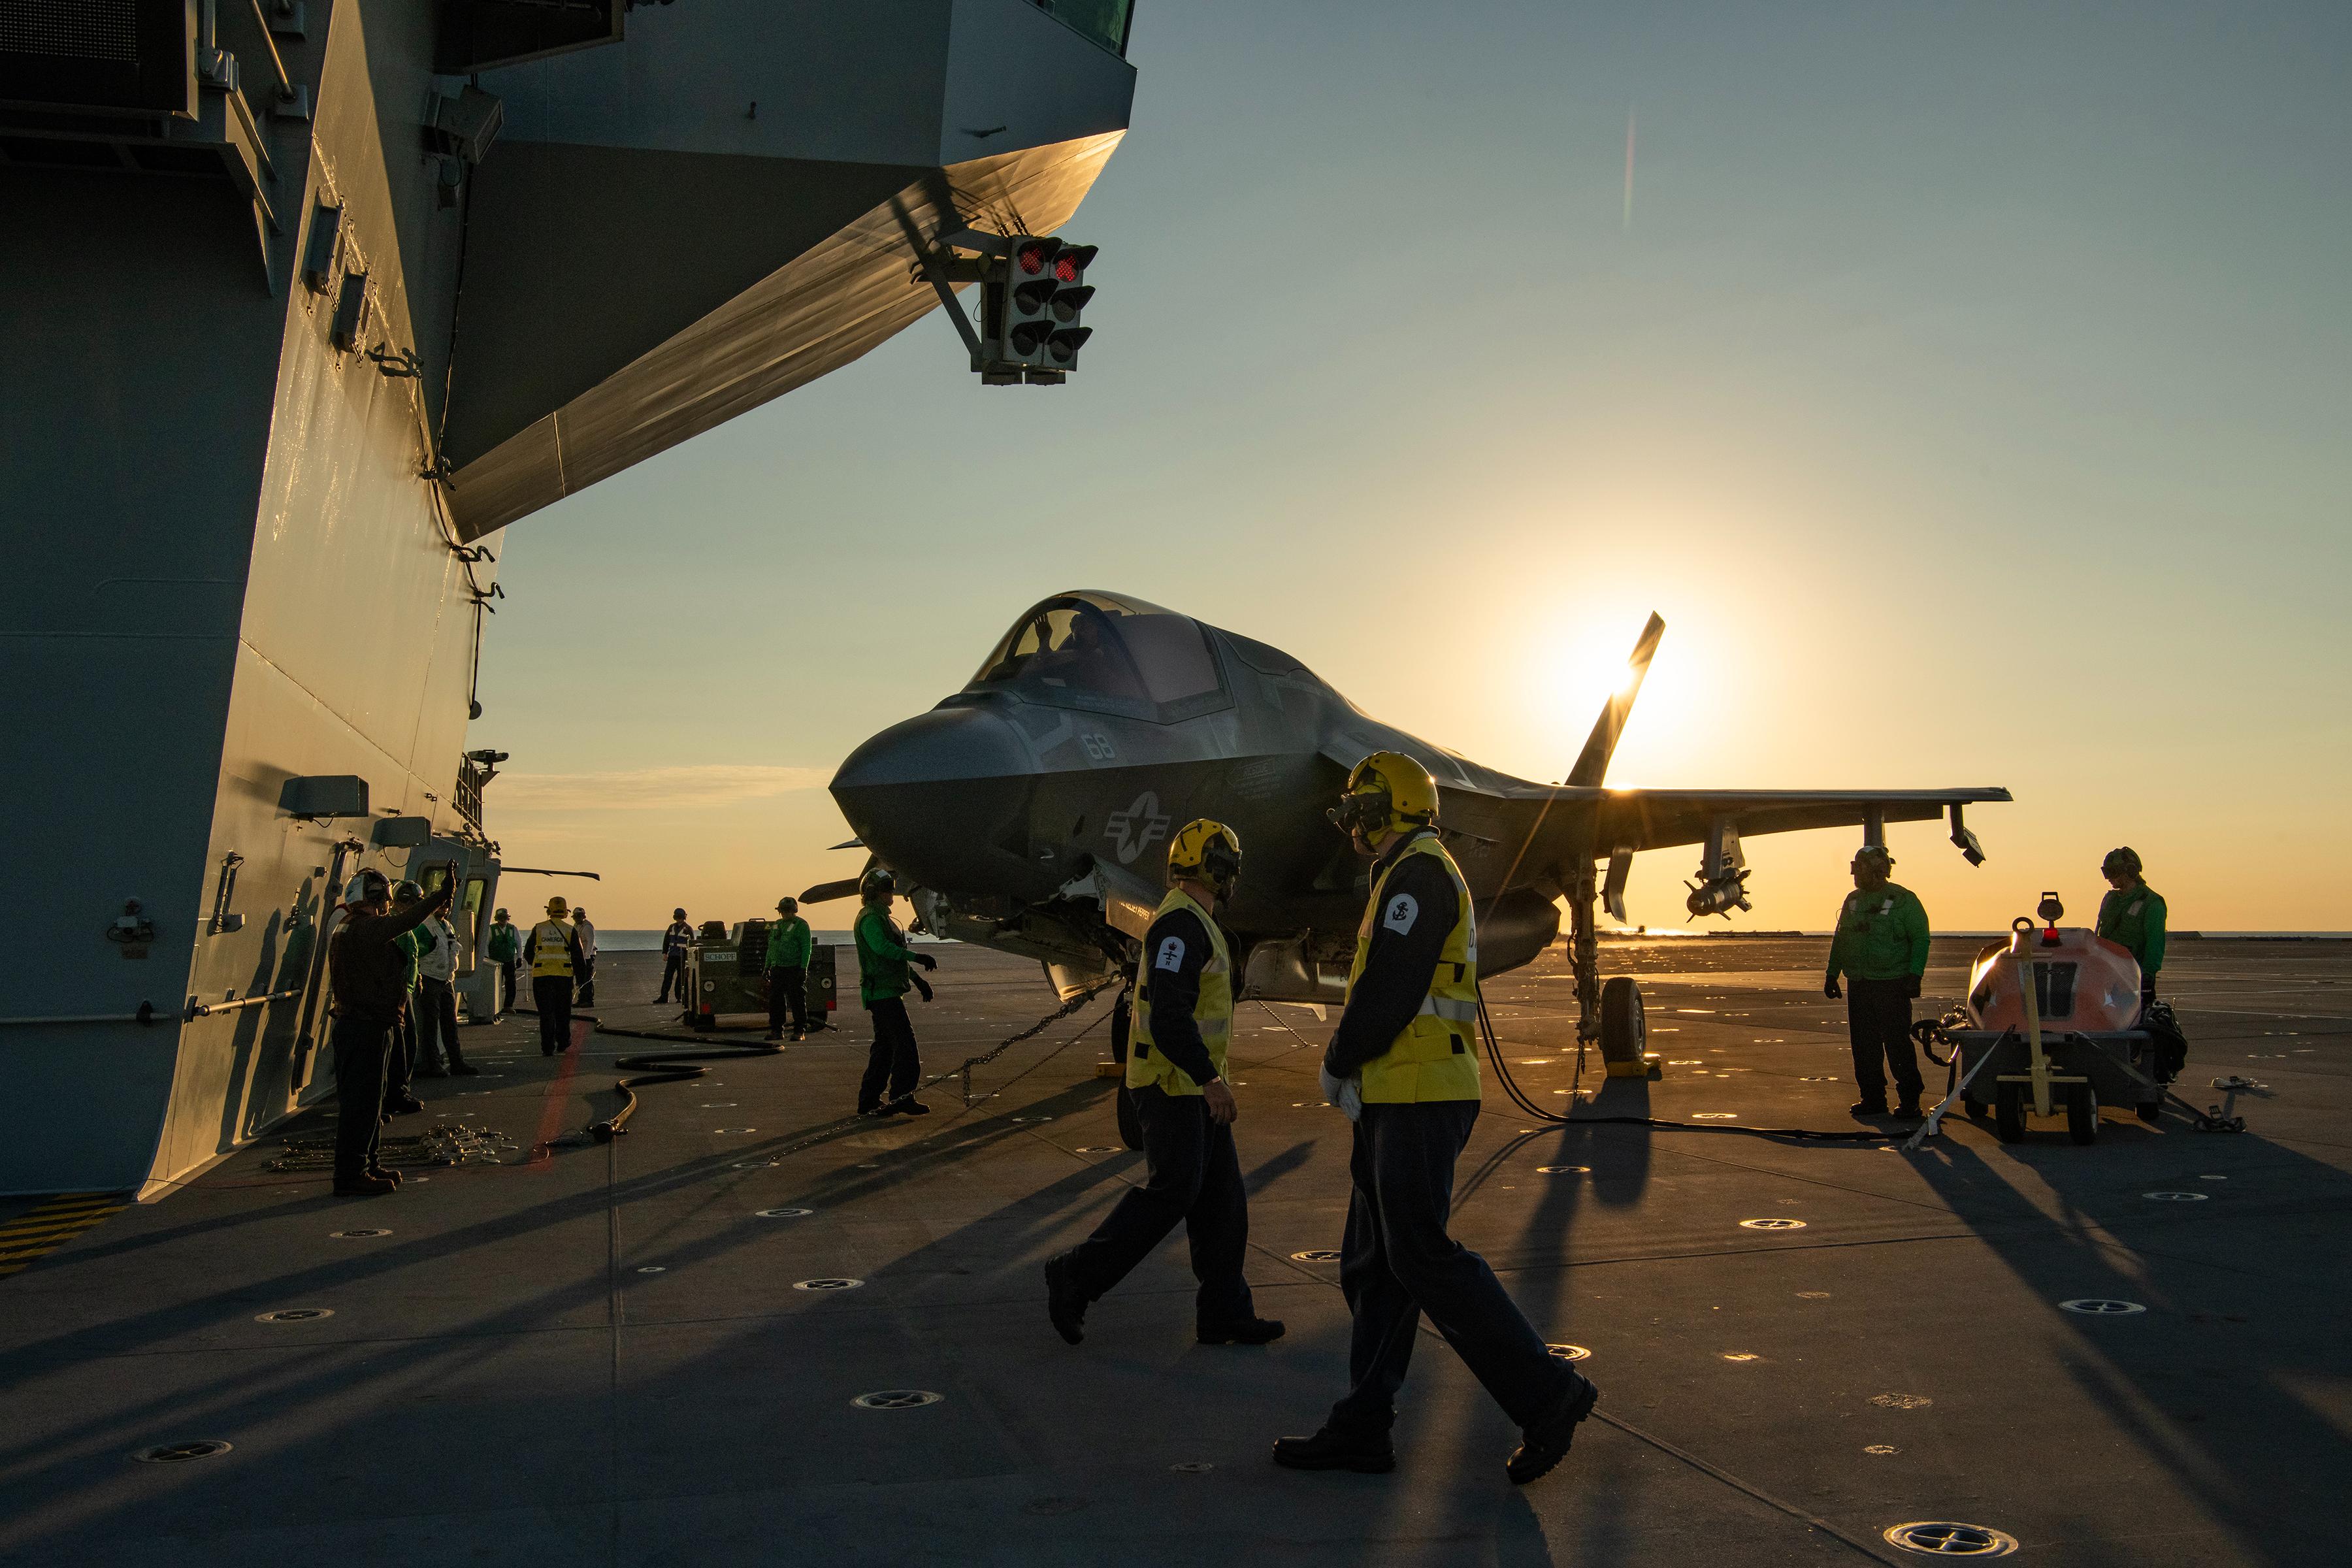 It takes an integrated team to successfully conduct F-35B developmental phase 3 (DT-3) flight trials aboard the U.K.’s biggest warship. Two or more teams combining into one begins with a willingness to do so, two-way communication, detailed planning, thorough preparation, and continues throughout execution. A fortnight into this deployment, the PAX ITF test team and HMS Prince of Wales ship’s company are bearing the fruit of work done before they got underway. And, bearing down—together—on the goals for the trials.